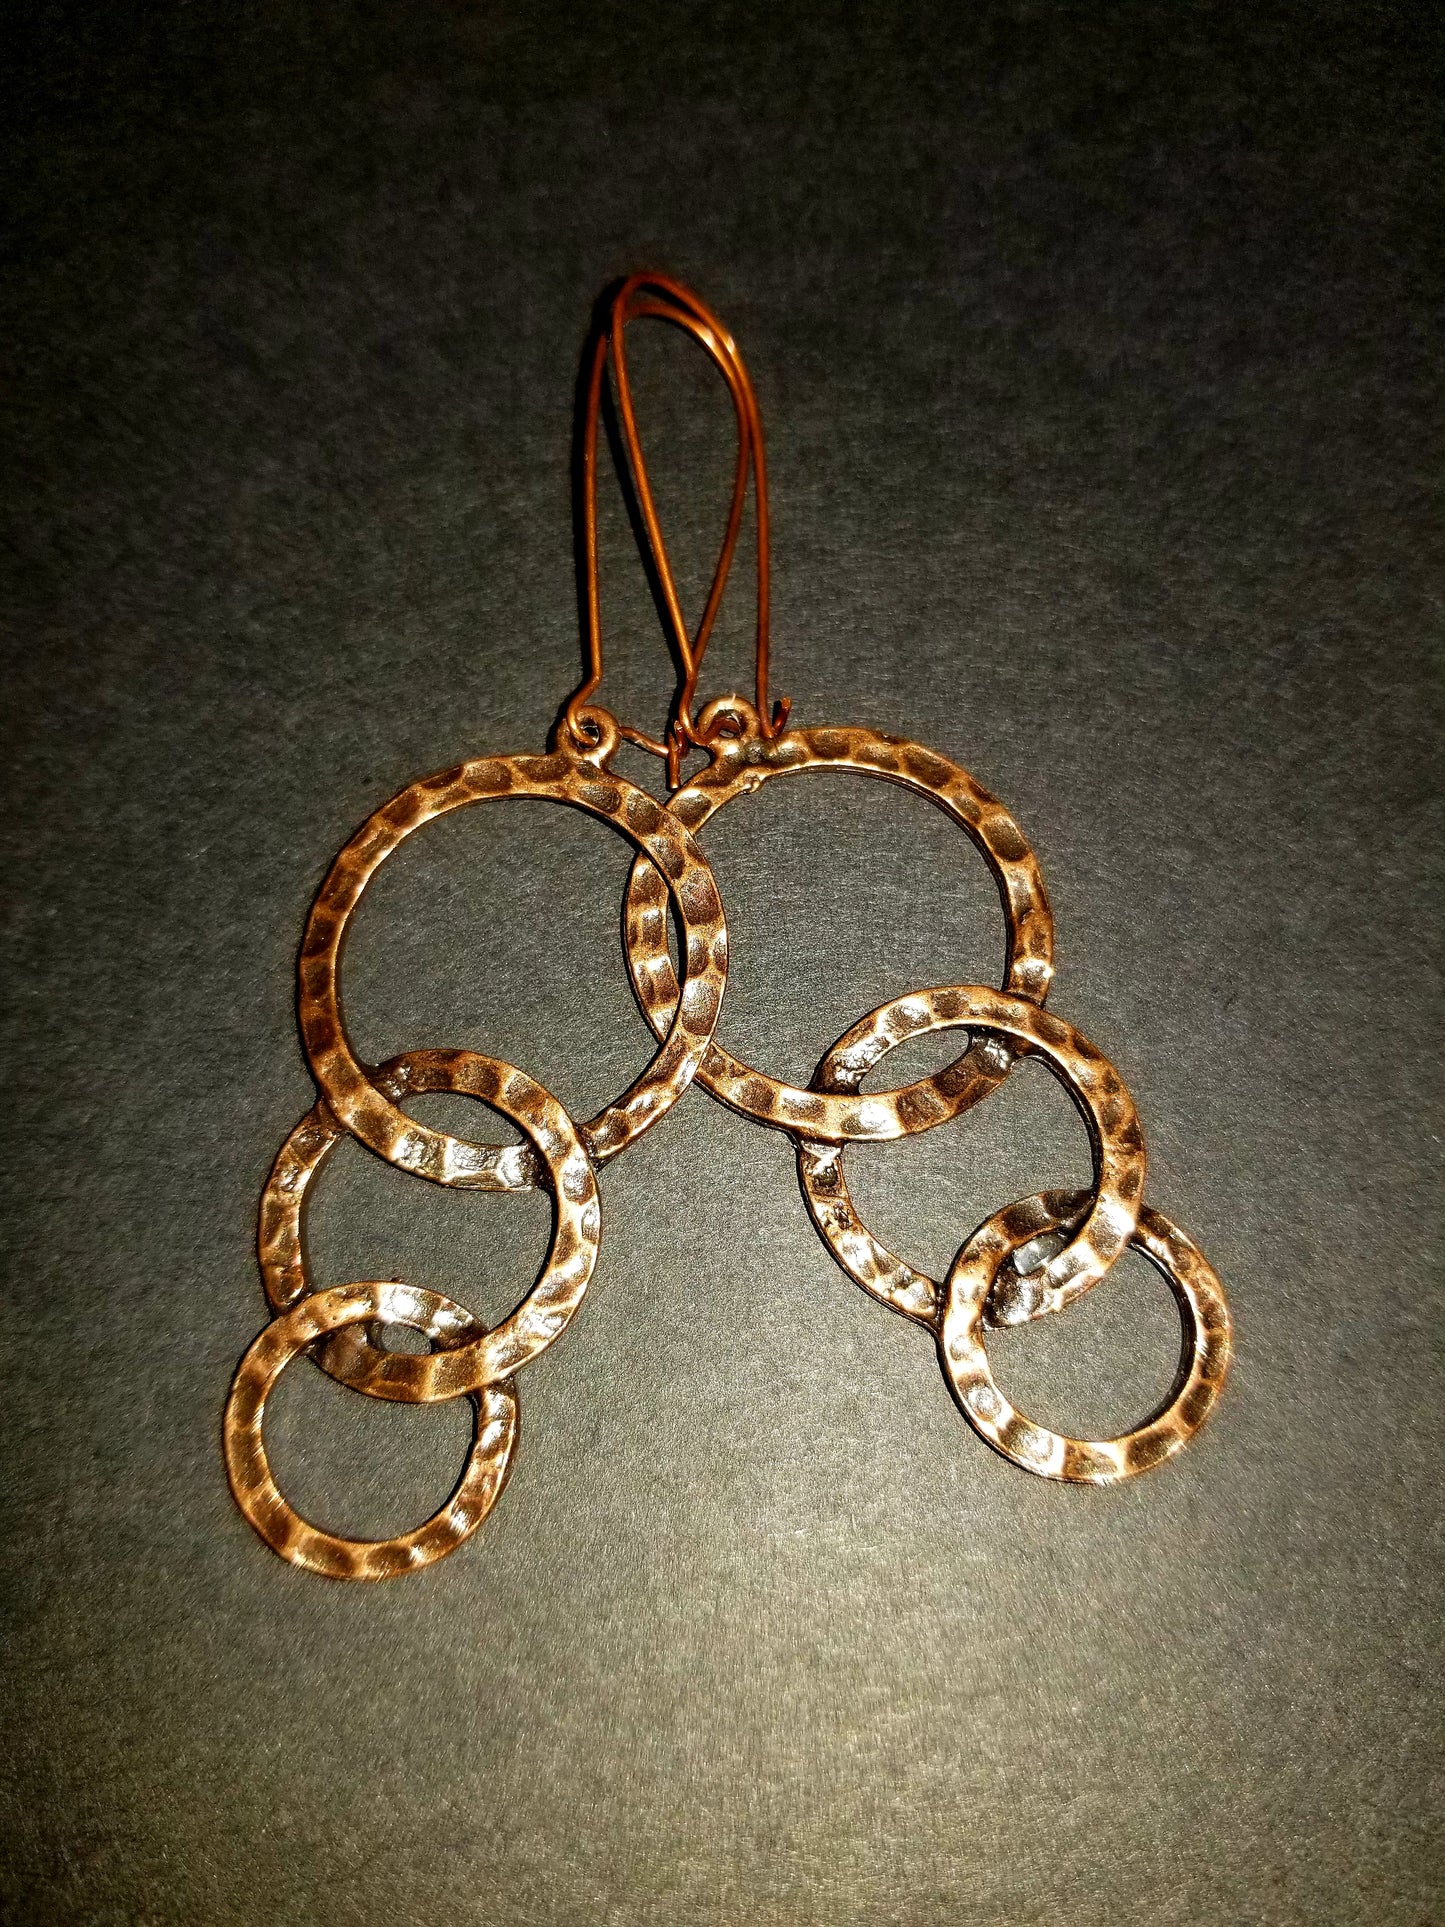 Concentric Antique Copper Earrings